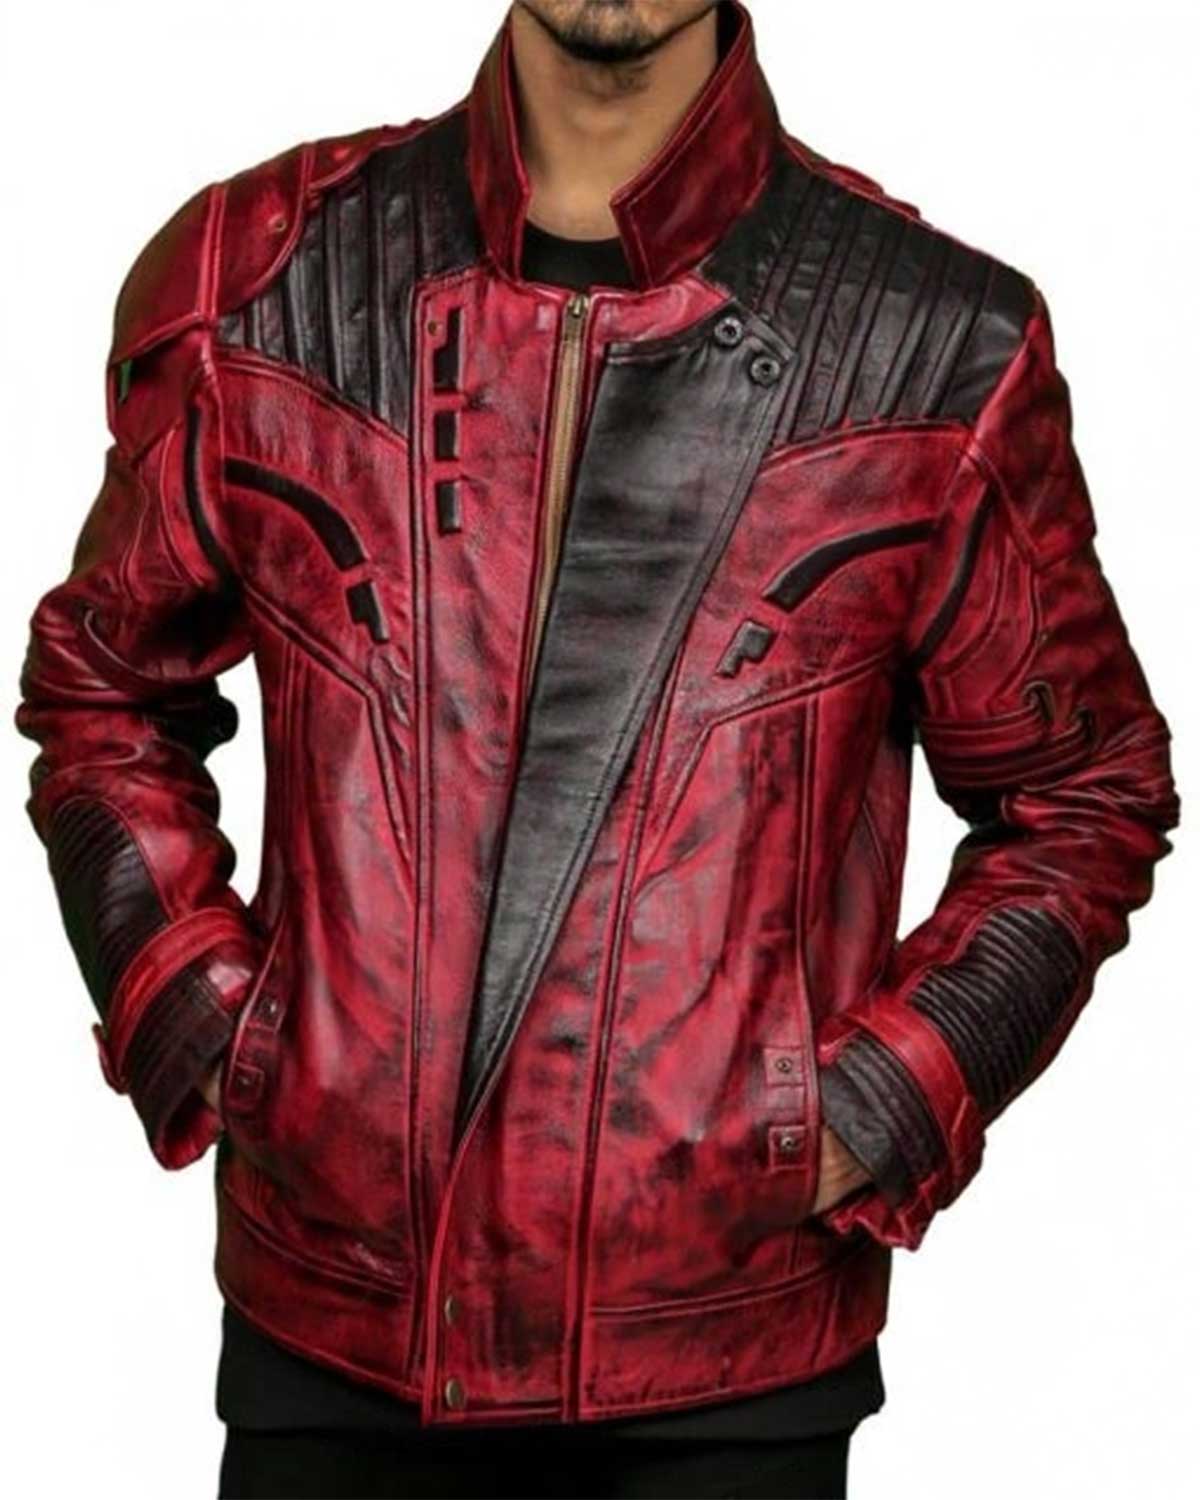 Elite Star Lord Guardians Of The Galaxy 2 Halloween Jacket